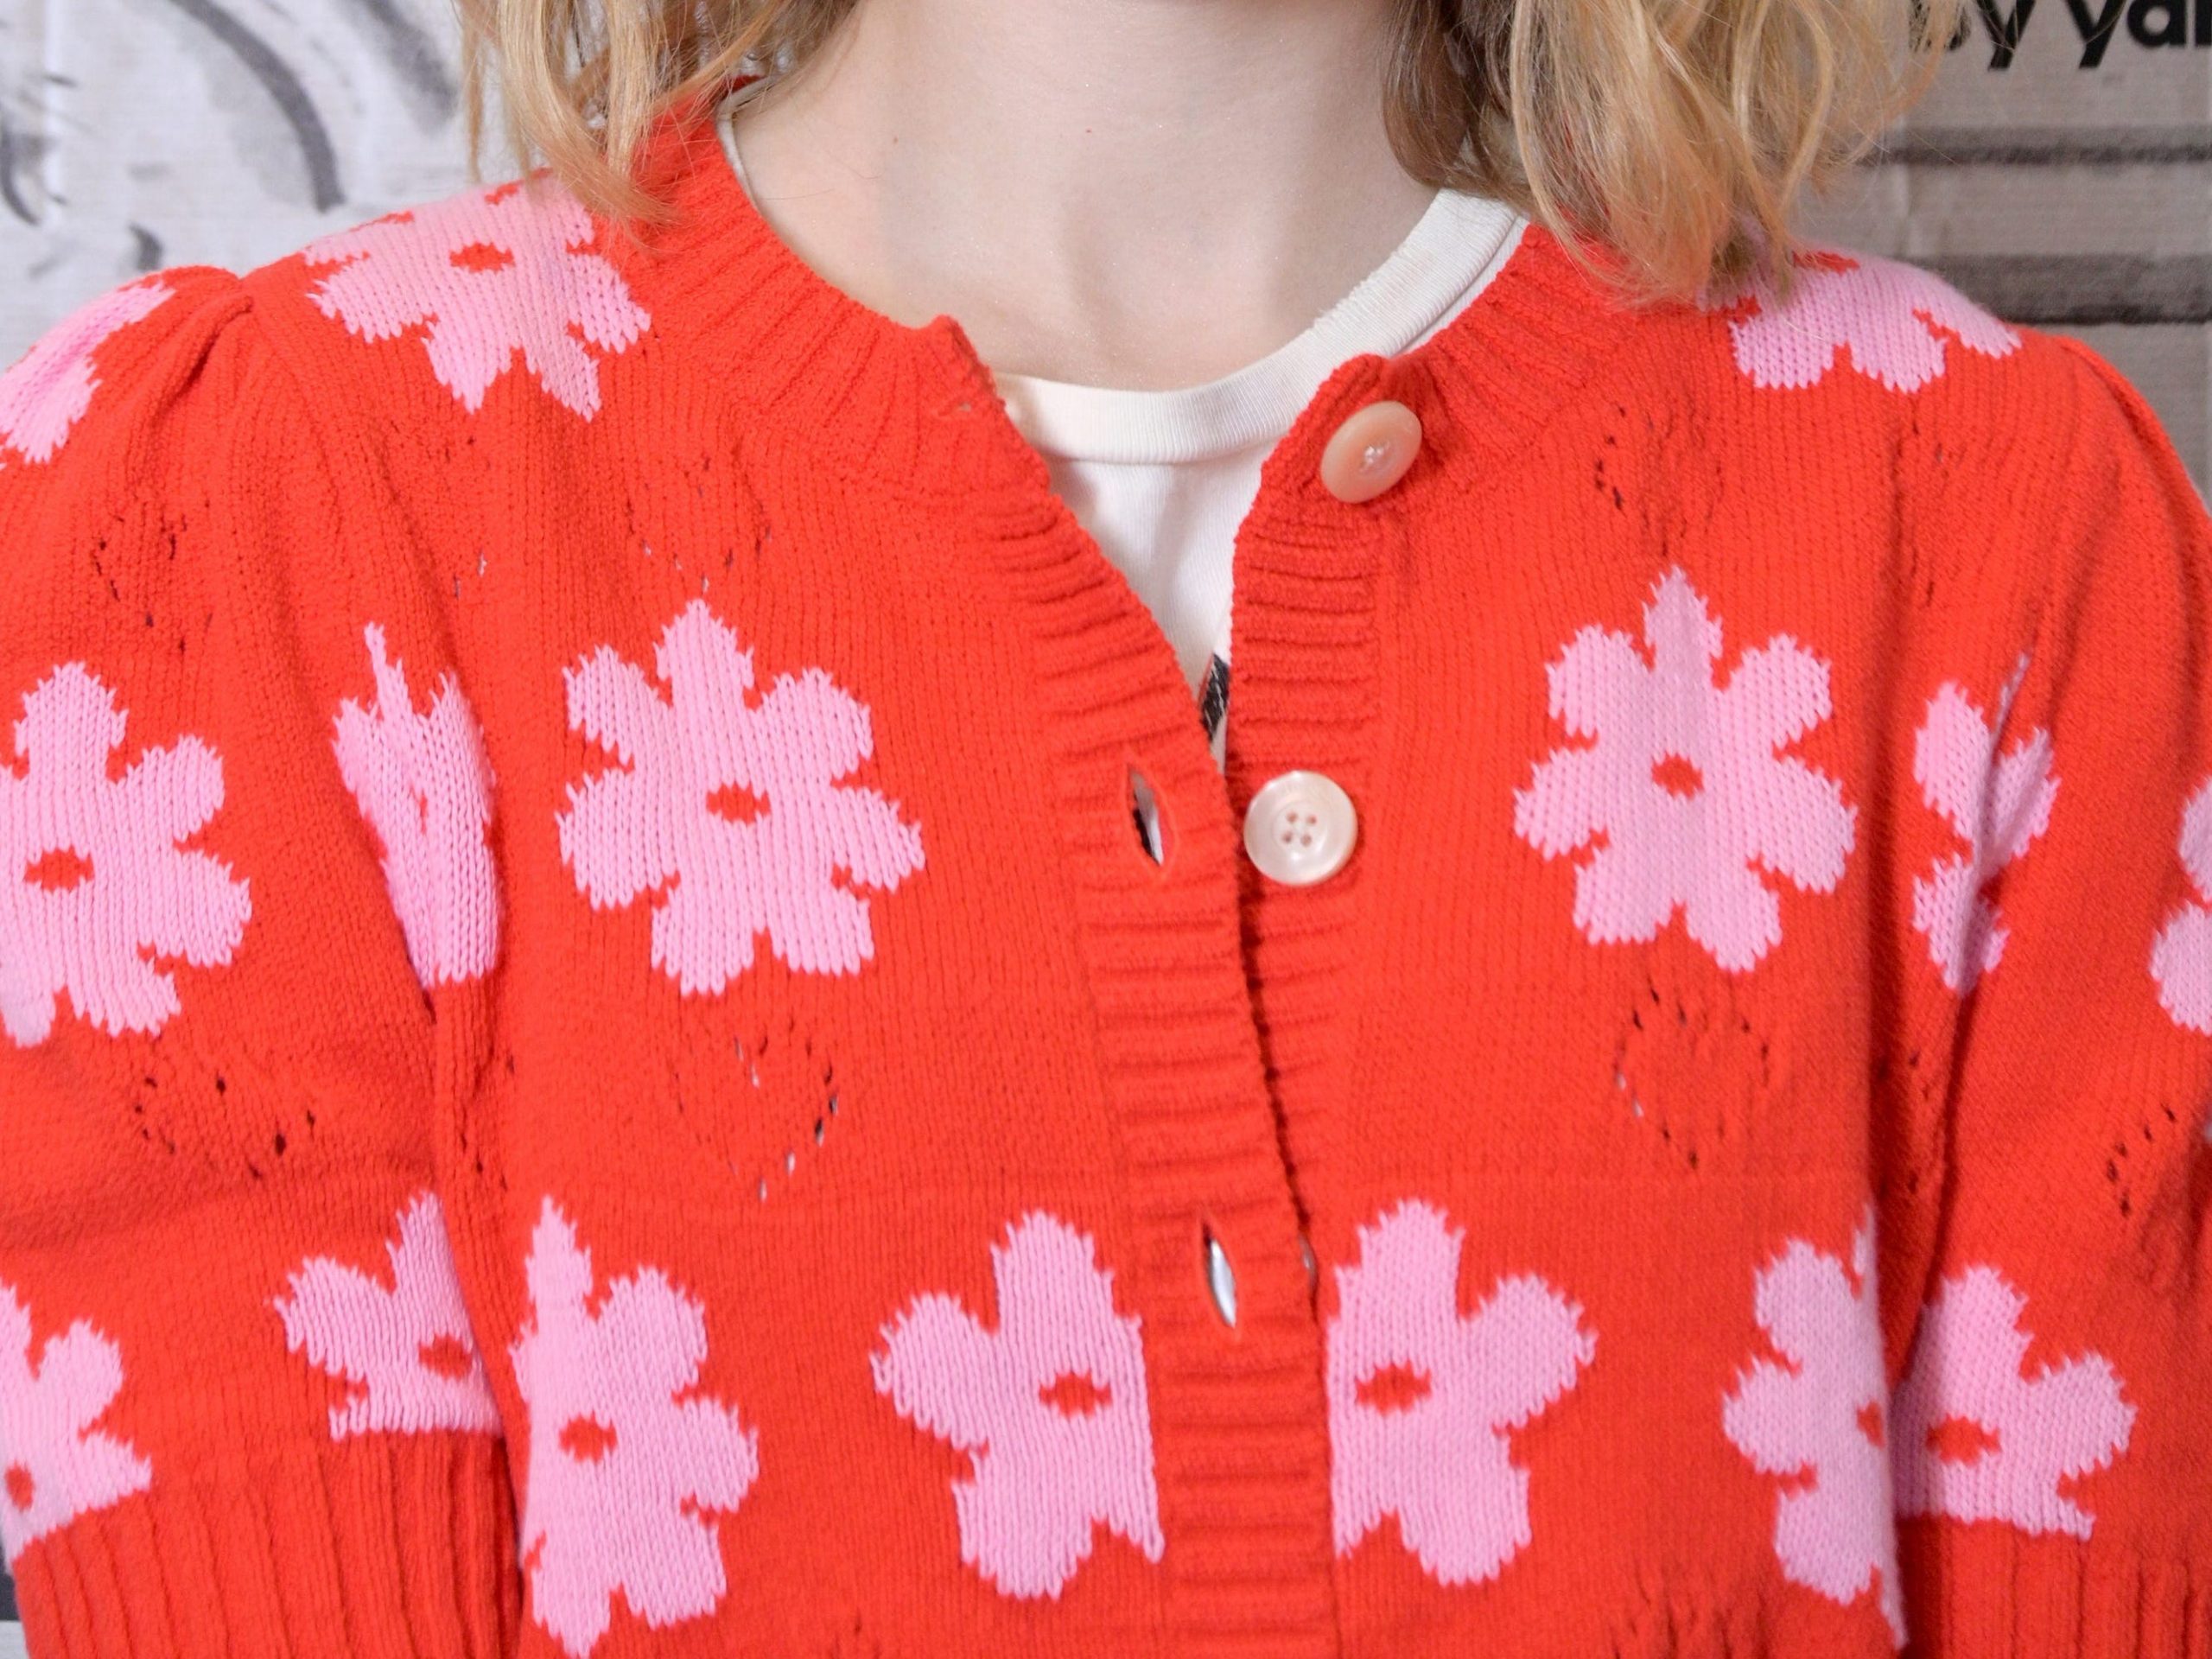 Millicent Simmonds in an orange cardigan with pink flowers.